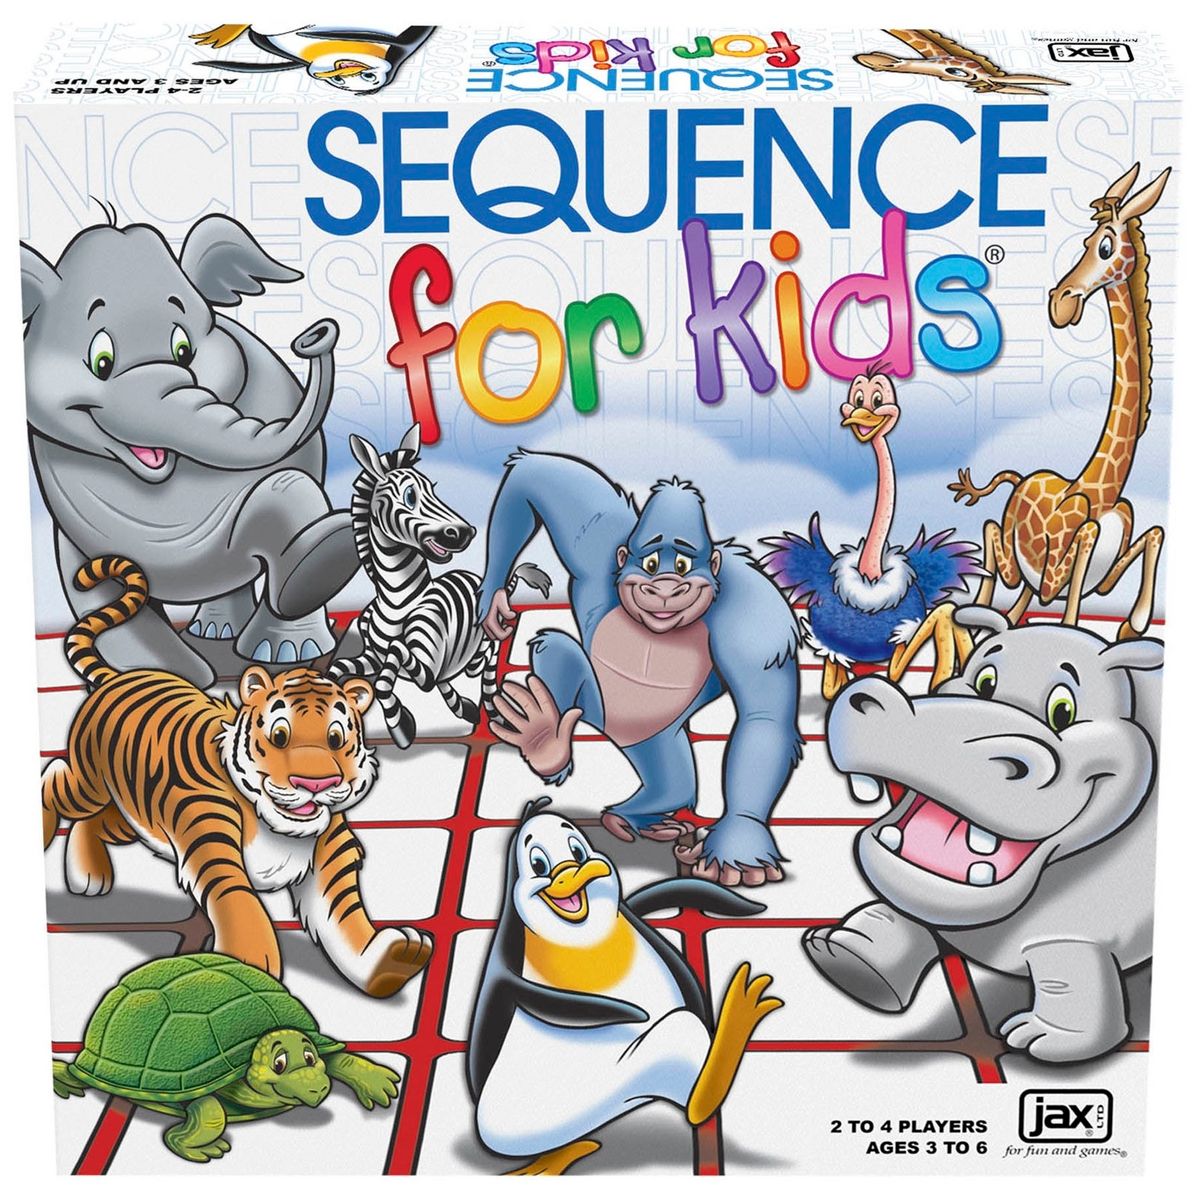 [RDY] [送料無料] ジャックス SEQUENCE for Kids ボードゲーム - 読書不要 の戦略ゲーム [楽天海外通販] | Jax SEQUENCE for Kids Board Game - The 'No Reading Required' Strategy Game